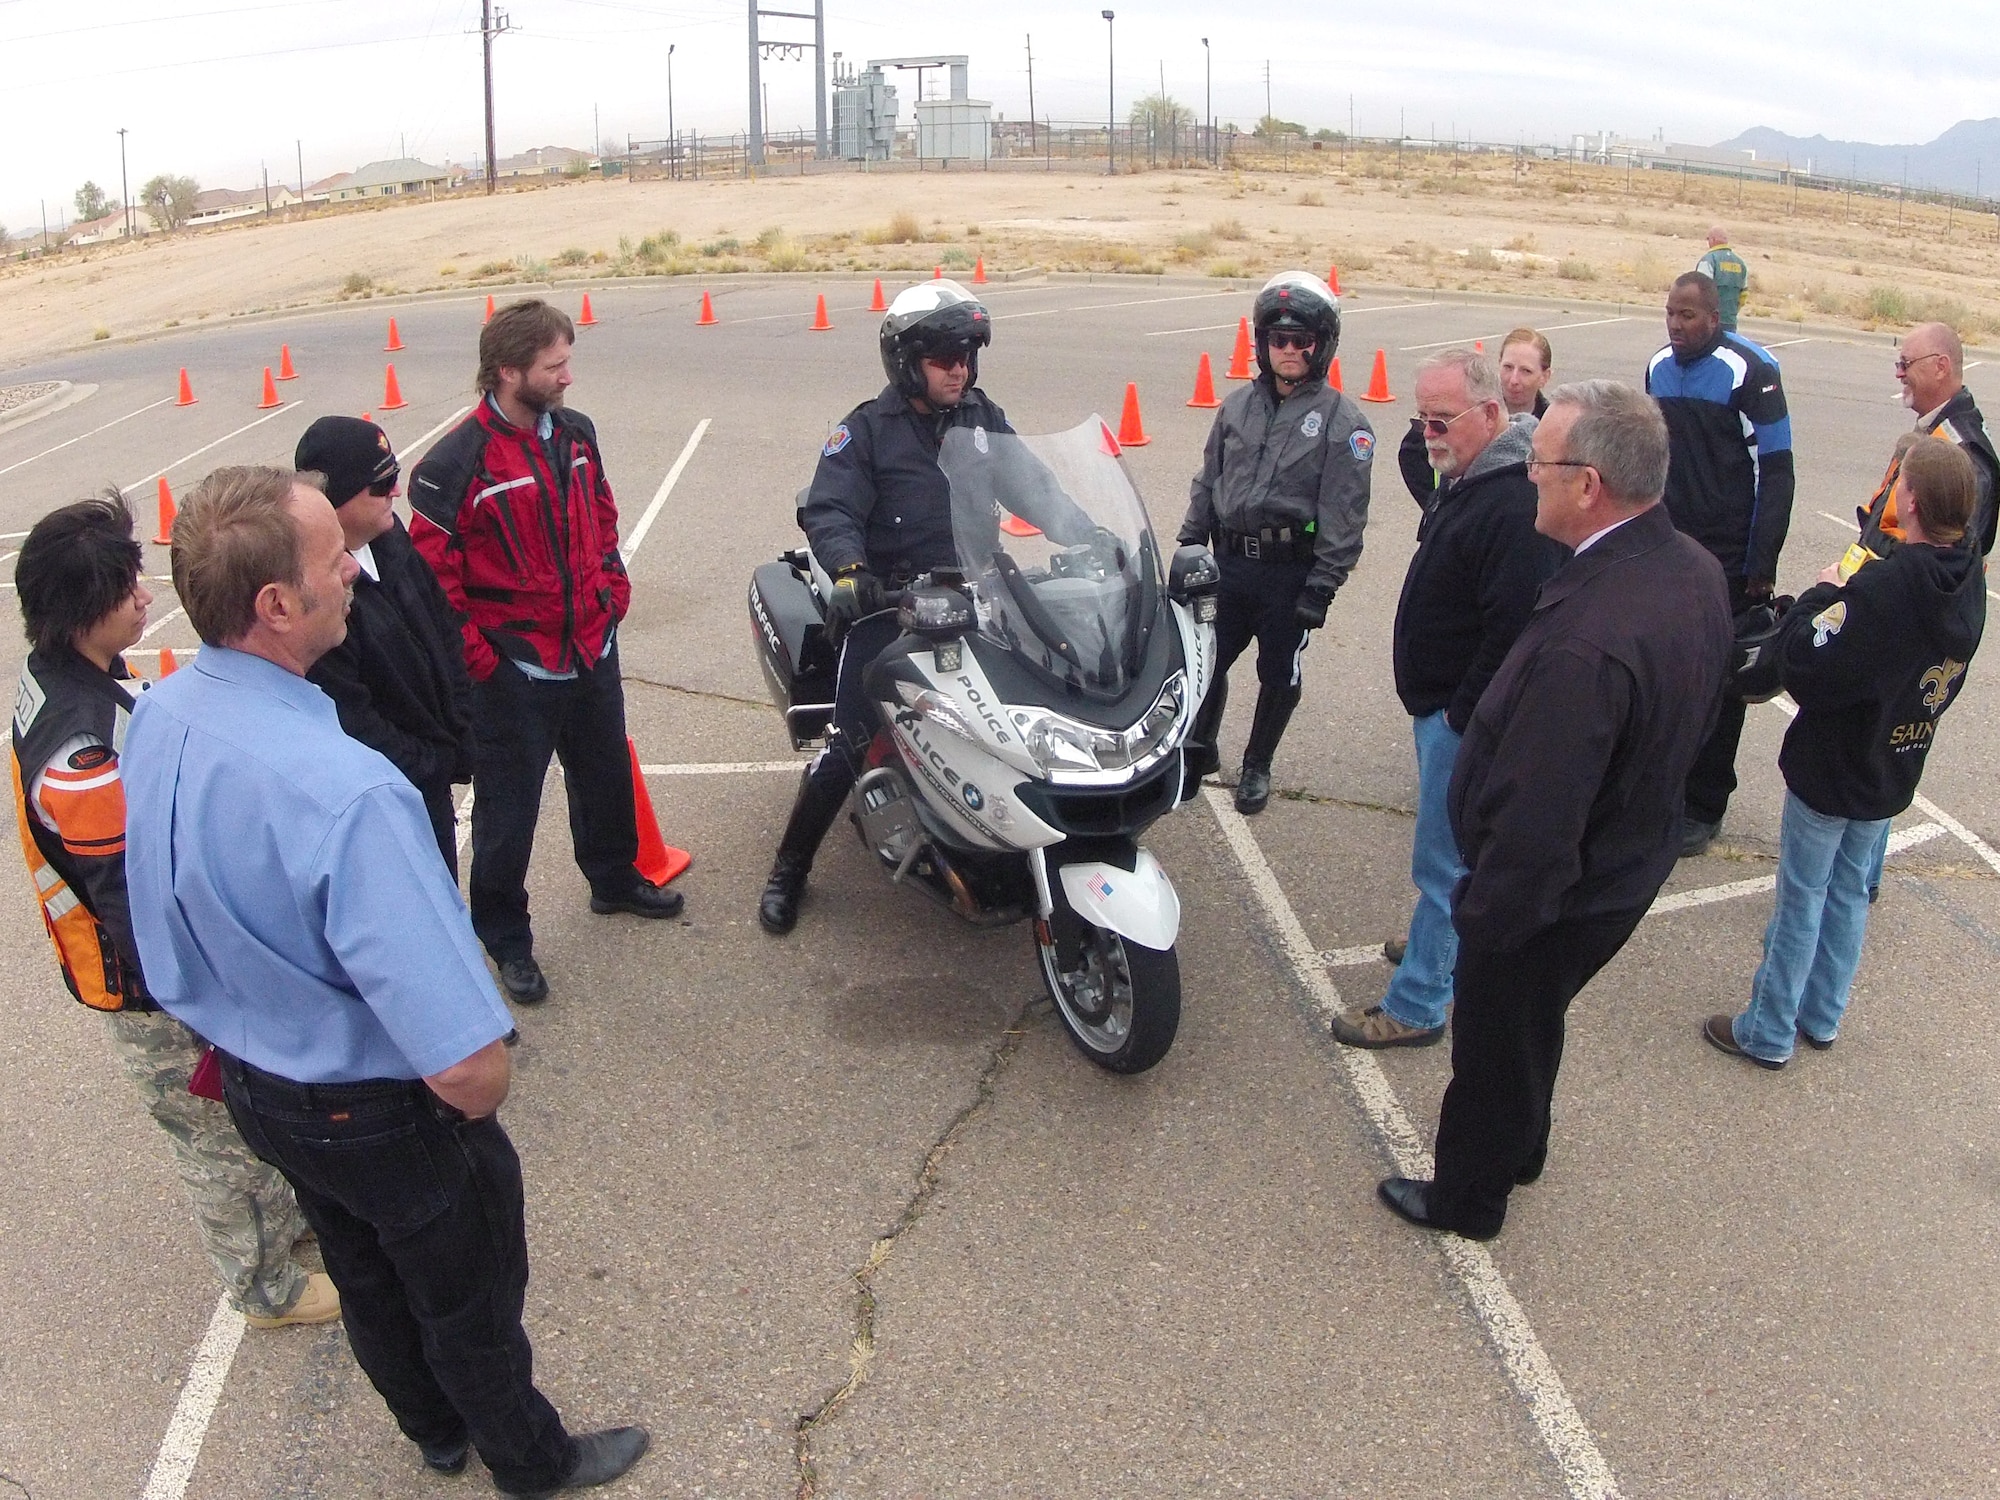 U.S. Officer David Weidner, Albuquerque Police Department, gives an overview of the training motor patrolmen receive during the Air Force Safety Center annual preseason motorcycle safety briefing held April 25 at the safety center. (Air Force photo by Keith A. Wright)